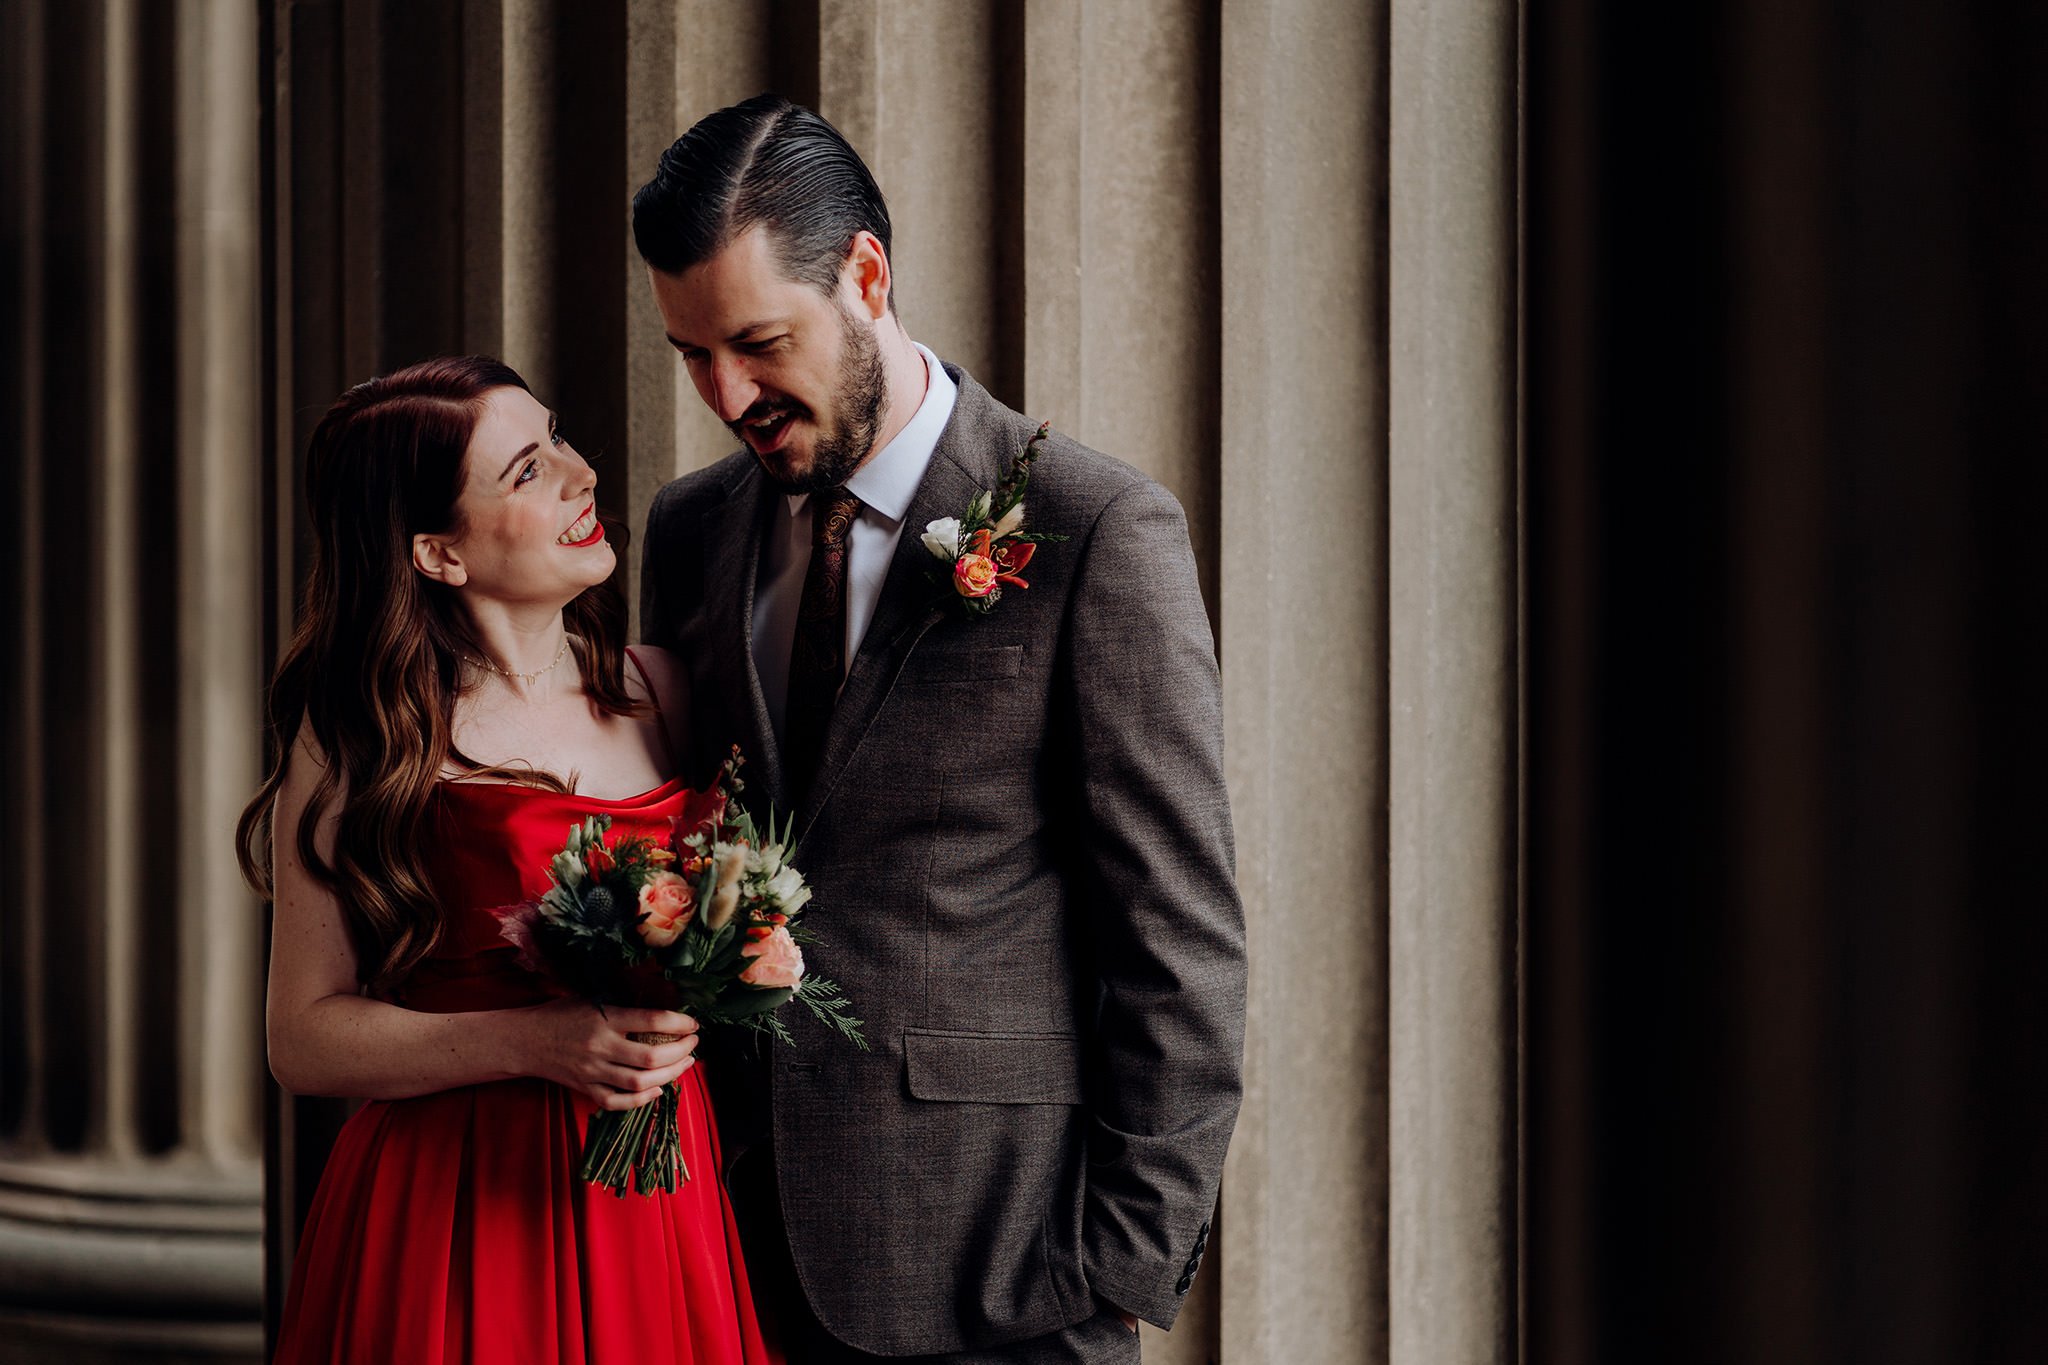 Bride and groom wedding portrait at St George's Hall Liverpool